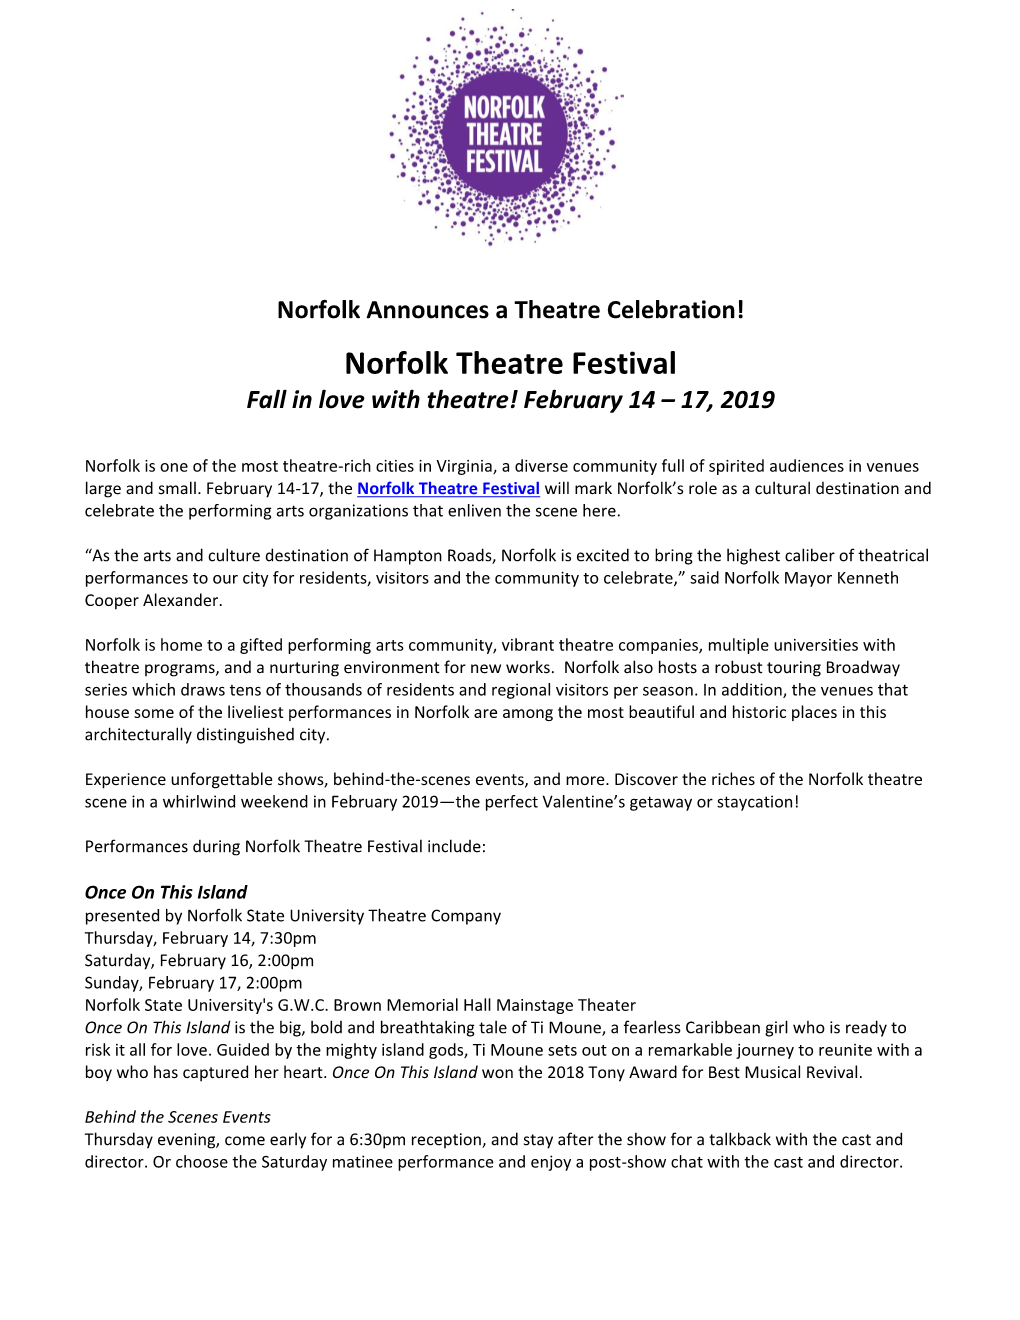 Norfolk Theatre Festival Fall in Love with Theatre! February 14 – 17, 2019